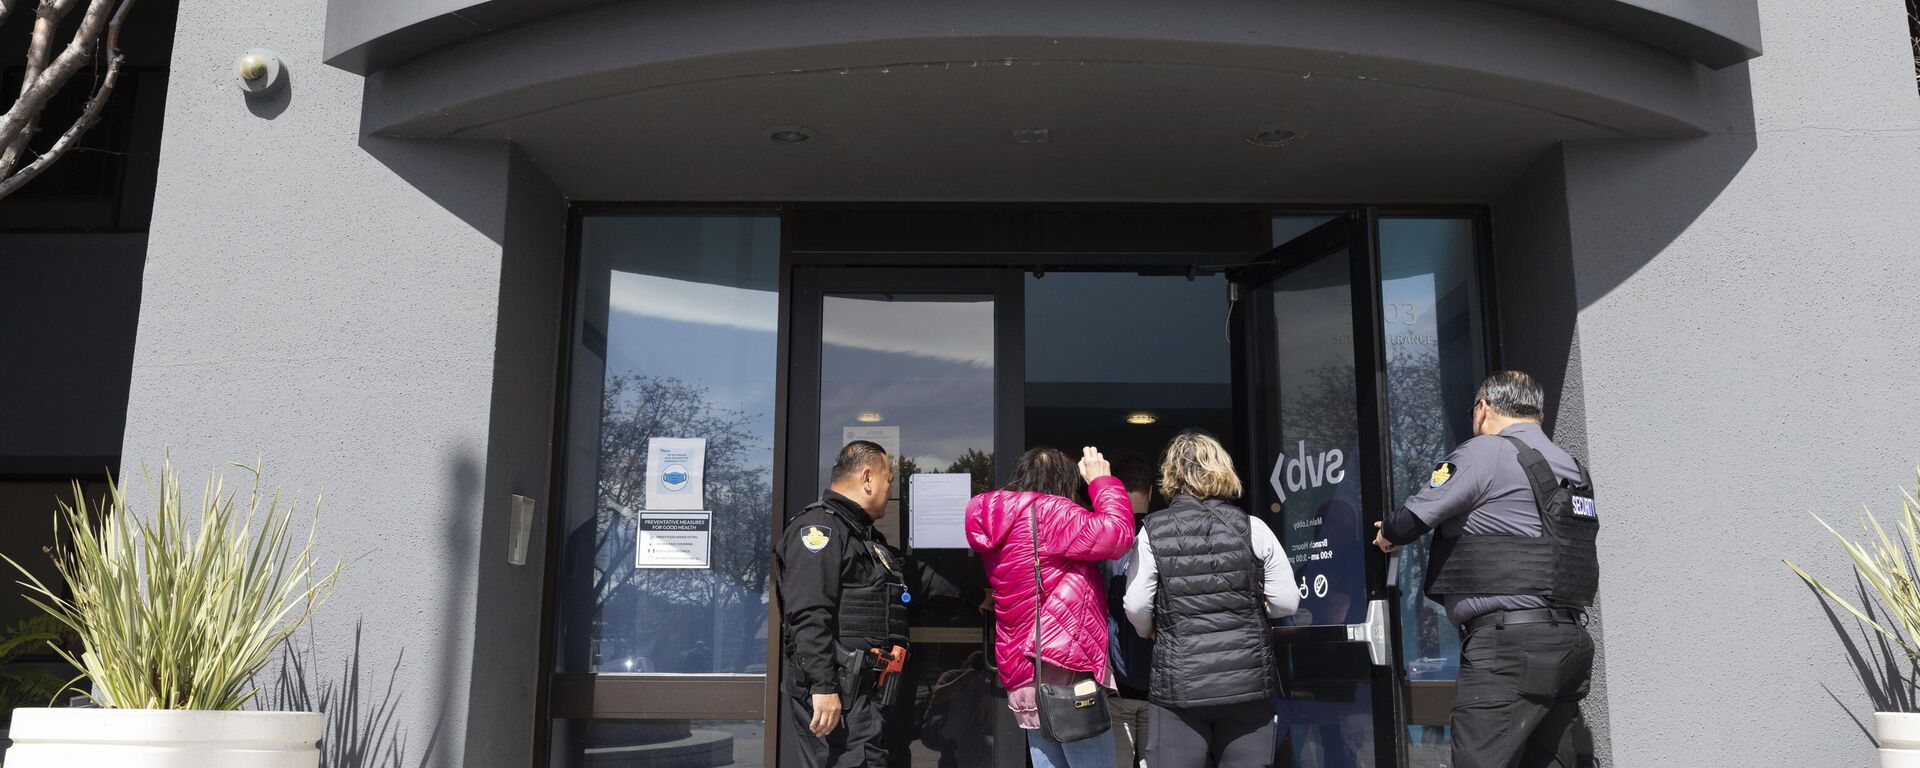 Security guards let individuals enter the Silicon Valley Bank's headquarters in Santa Clara, Calif., on Monday, March 13, 2023. - Sputnik International, 1920, 18.03.2023